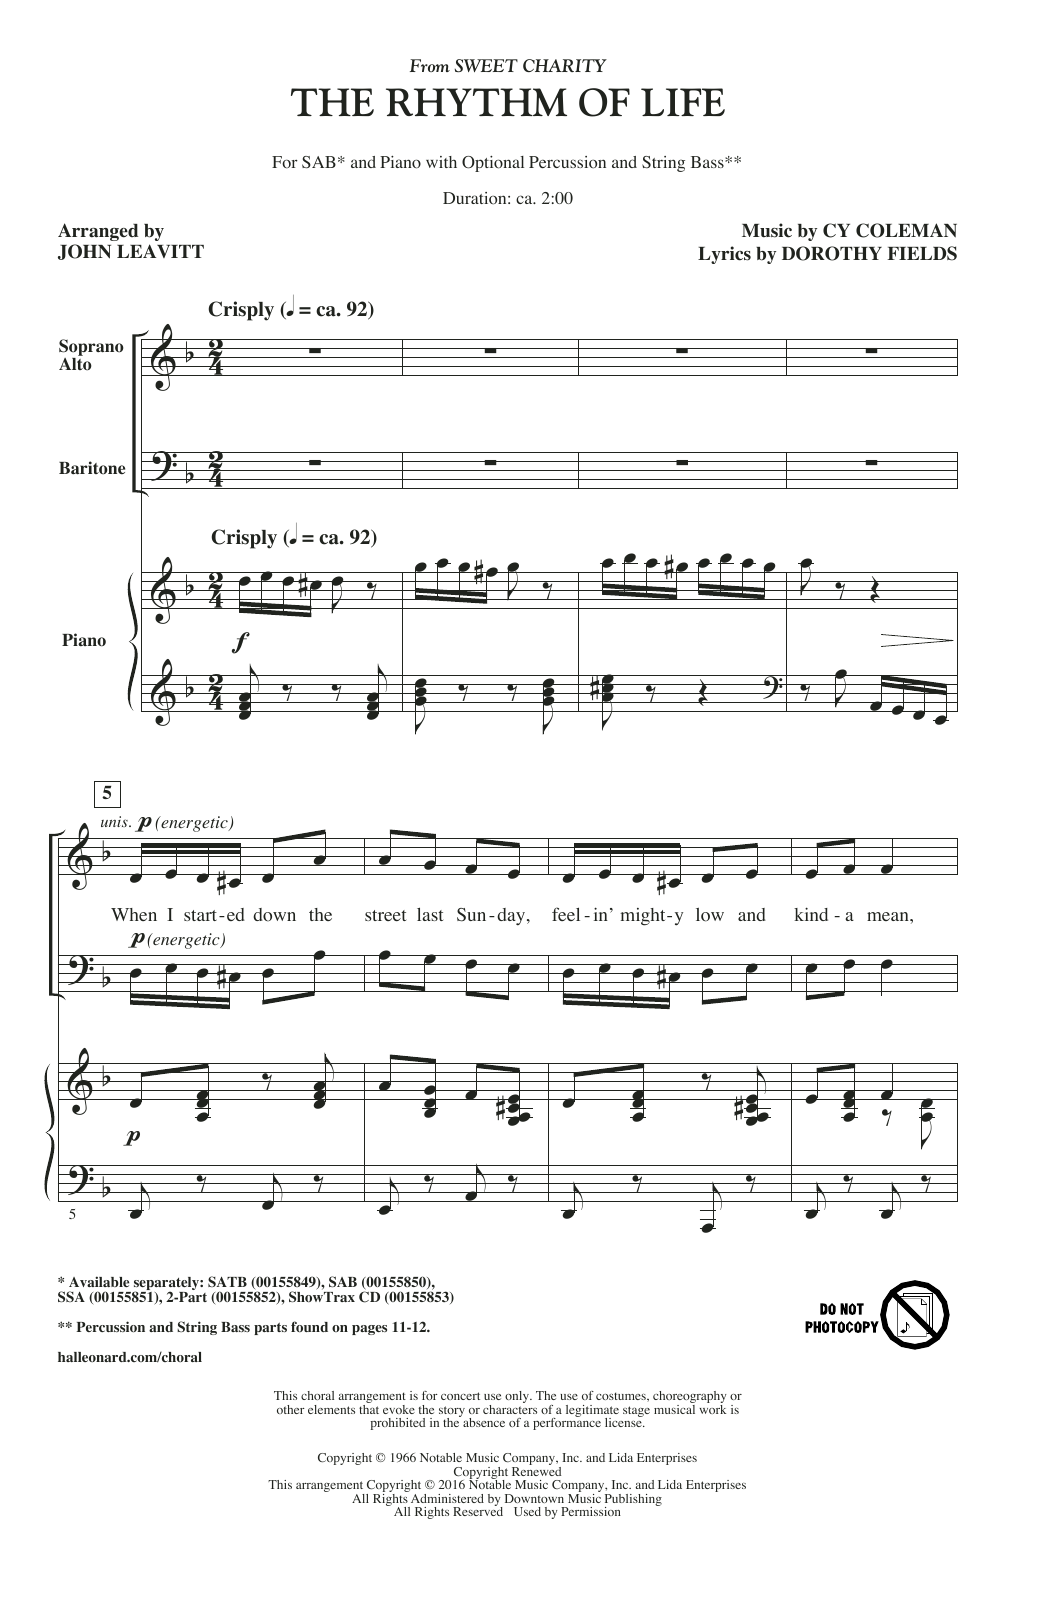 Cy Coleman The Rhythm Of Life (from Sweet Charity) (arr. John Leavitt) sheet music notes and chords. Download Printable PDF.